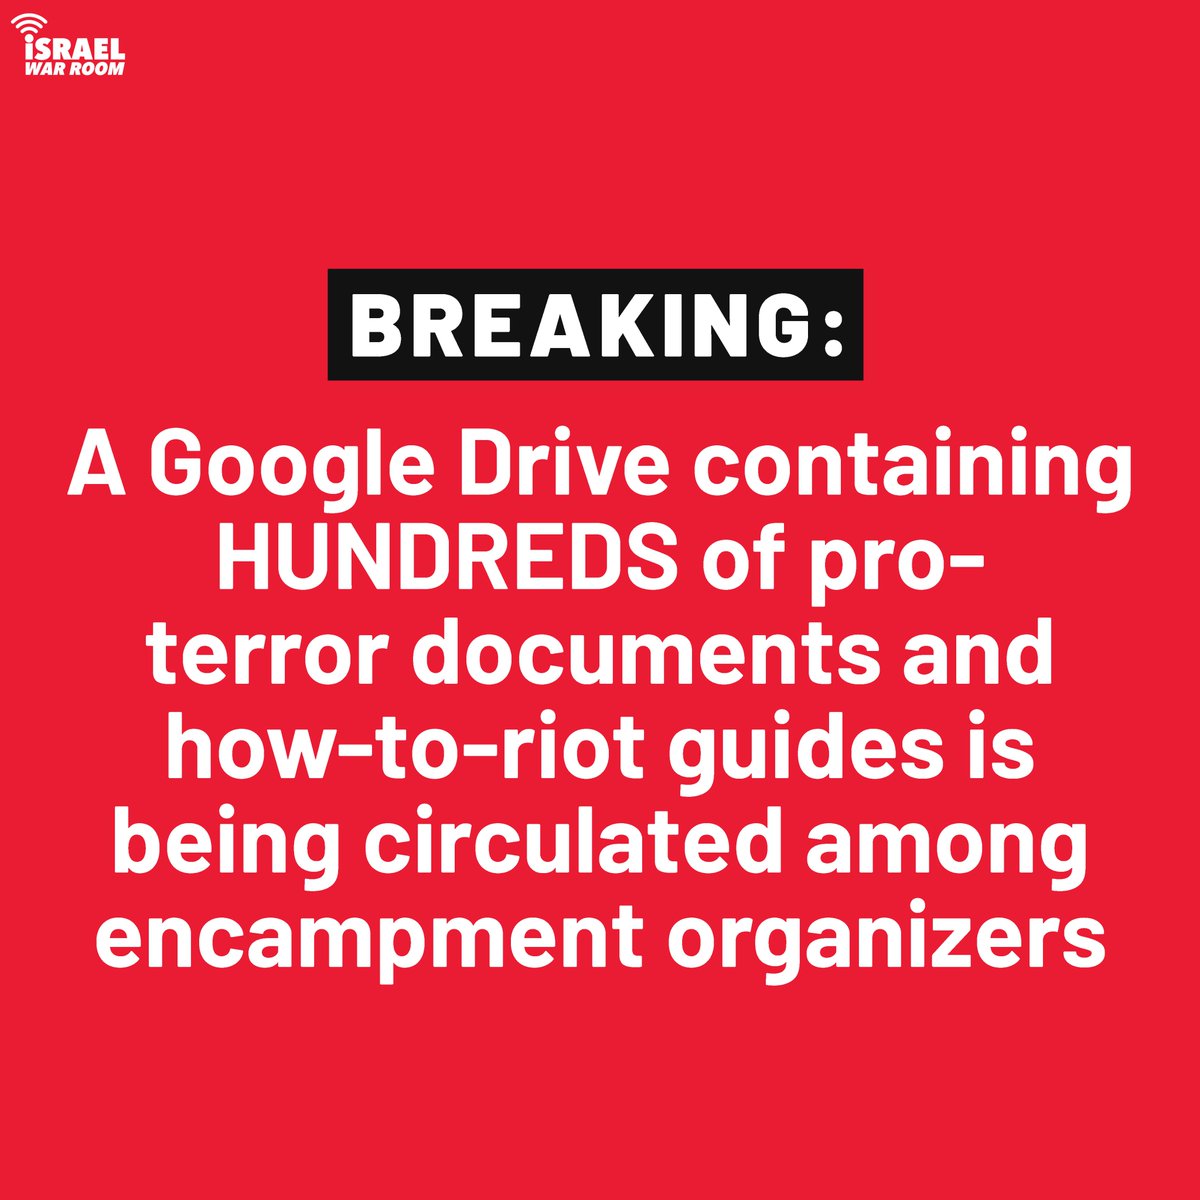 #BREAKING: A Google Drive containing 200+ pro-terror and how-to documents is being circulated among encampment organizers. 🧵 (1/11)